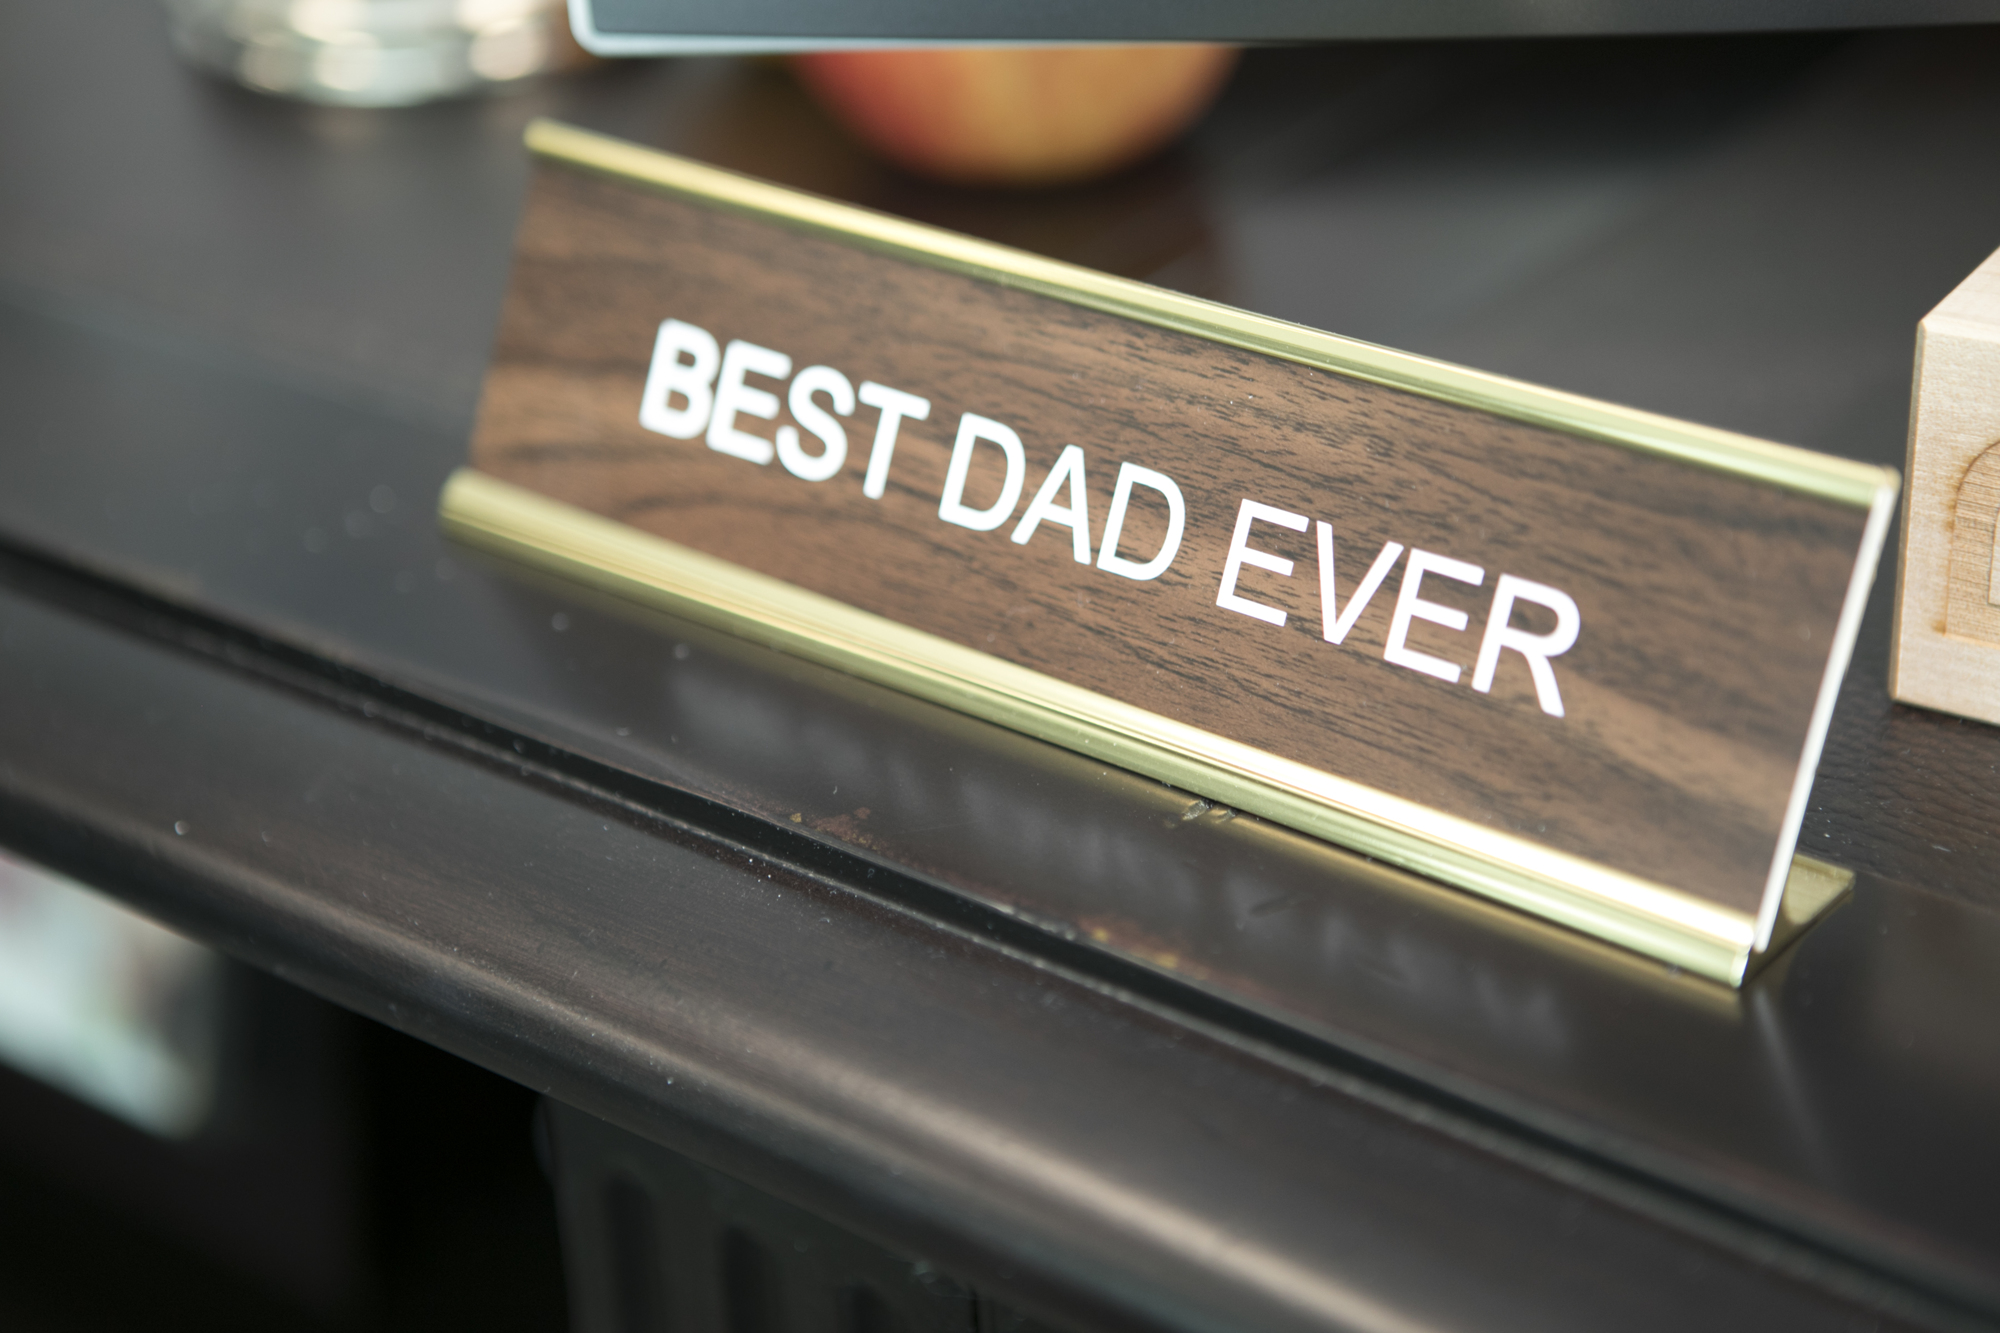 Jackson’s oldest daughter, Chanler, gave him that nameplate. Chanler Jackson is a production assistant with the 